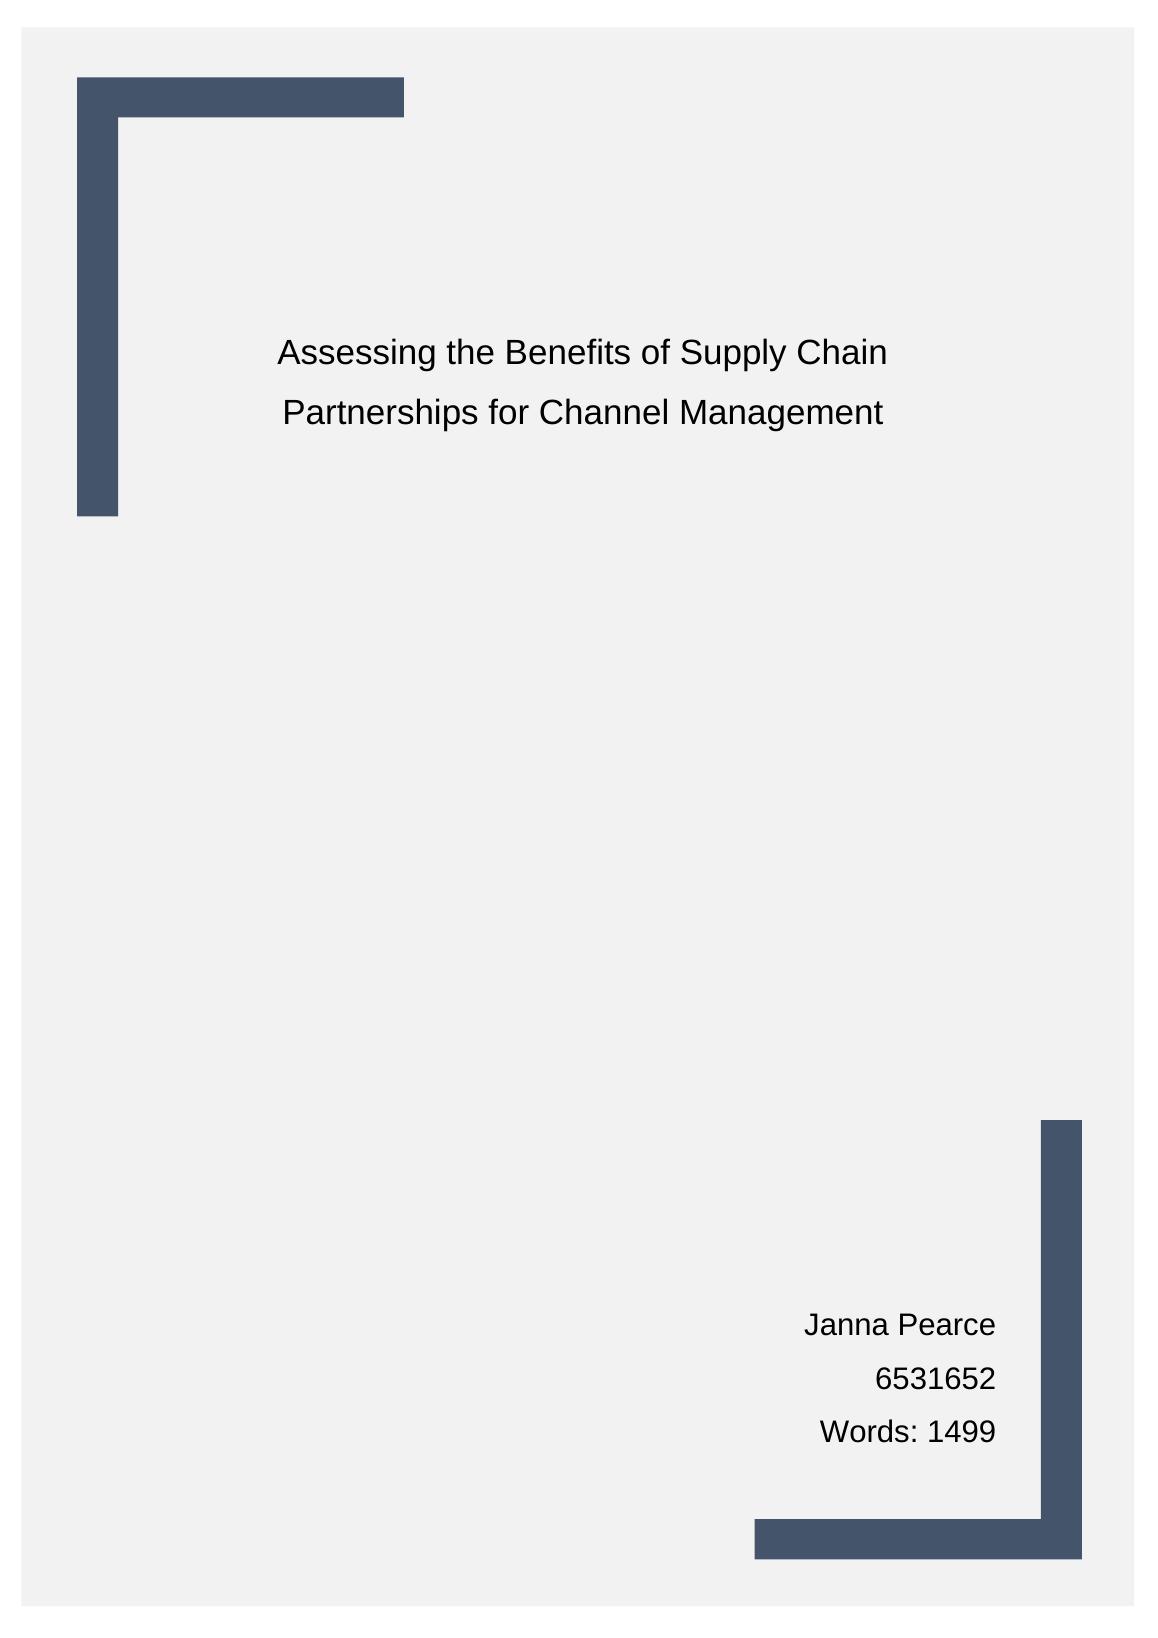 Supply Chain Overview and Trends_1